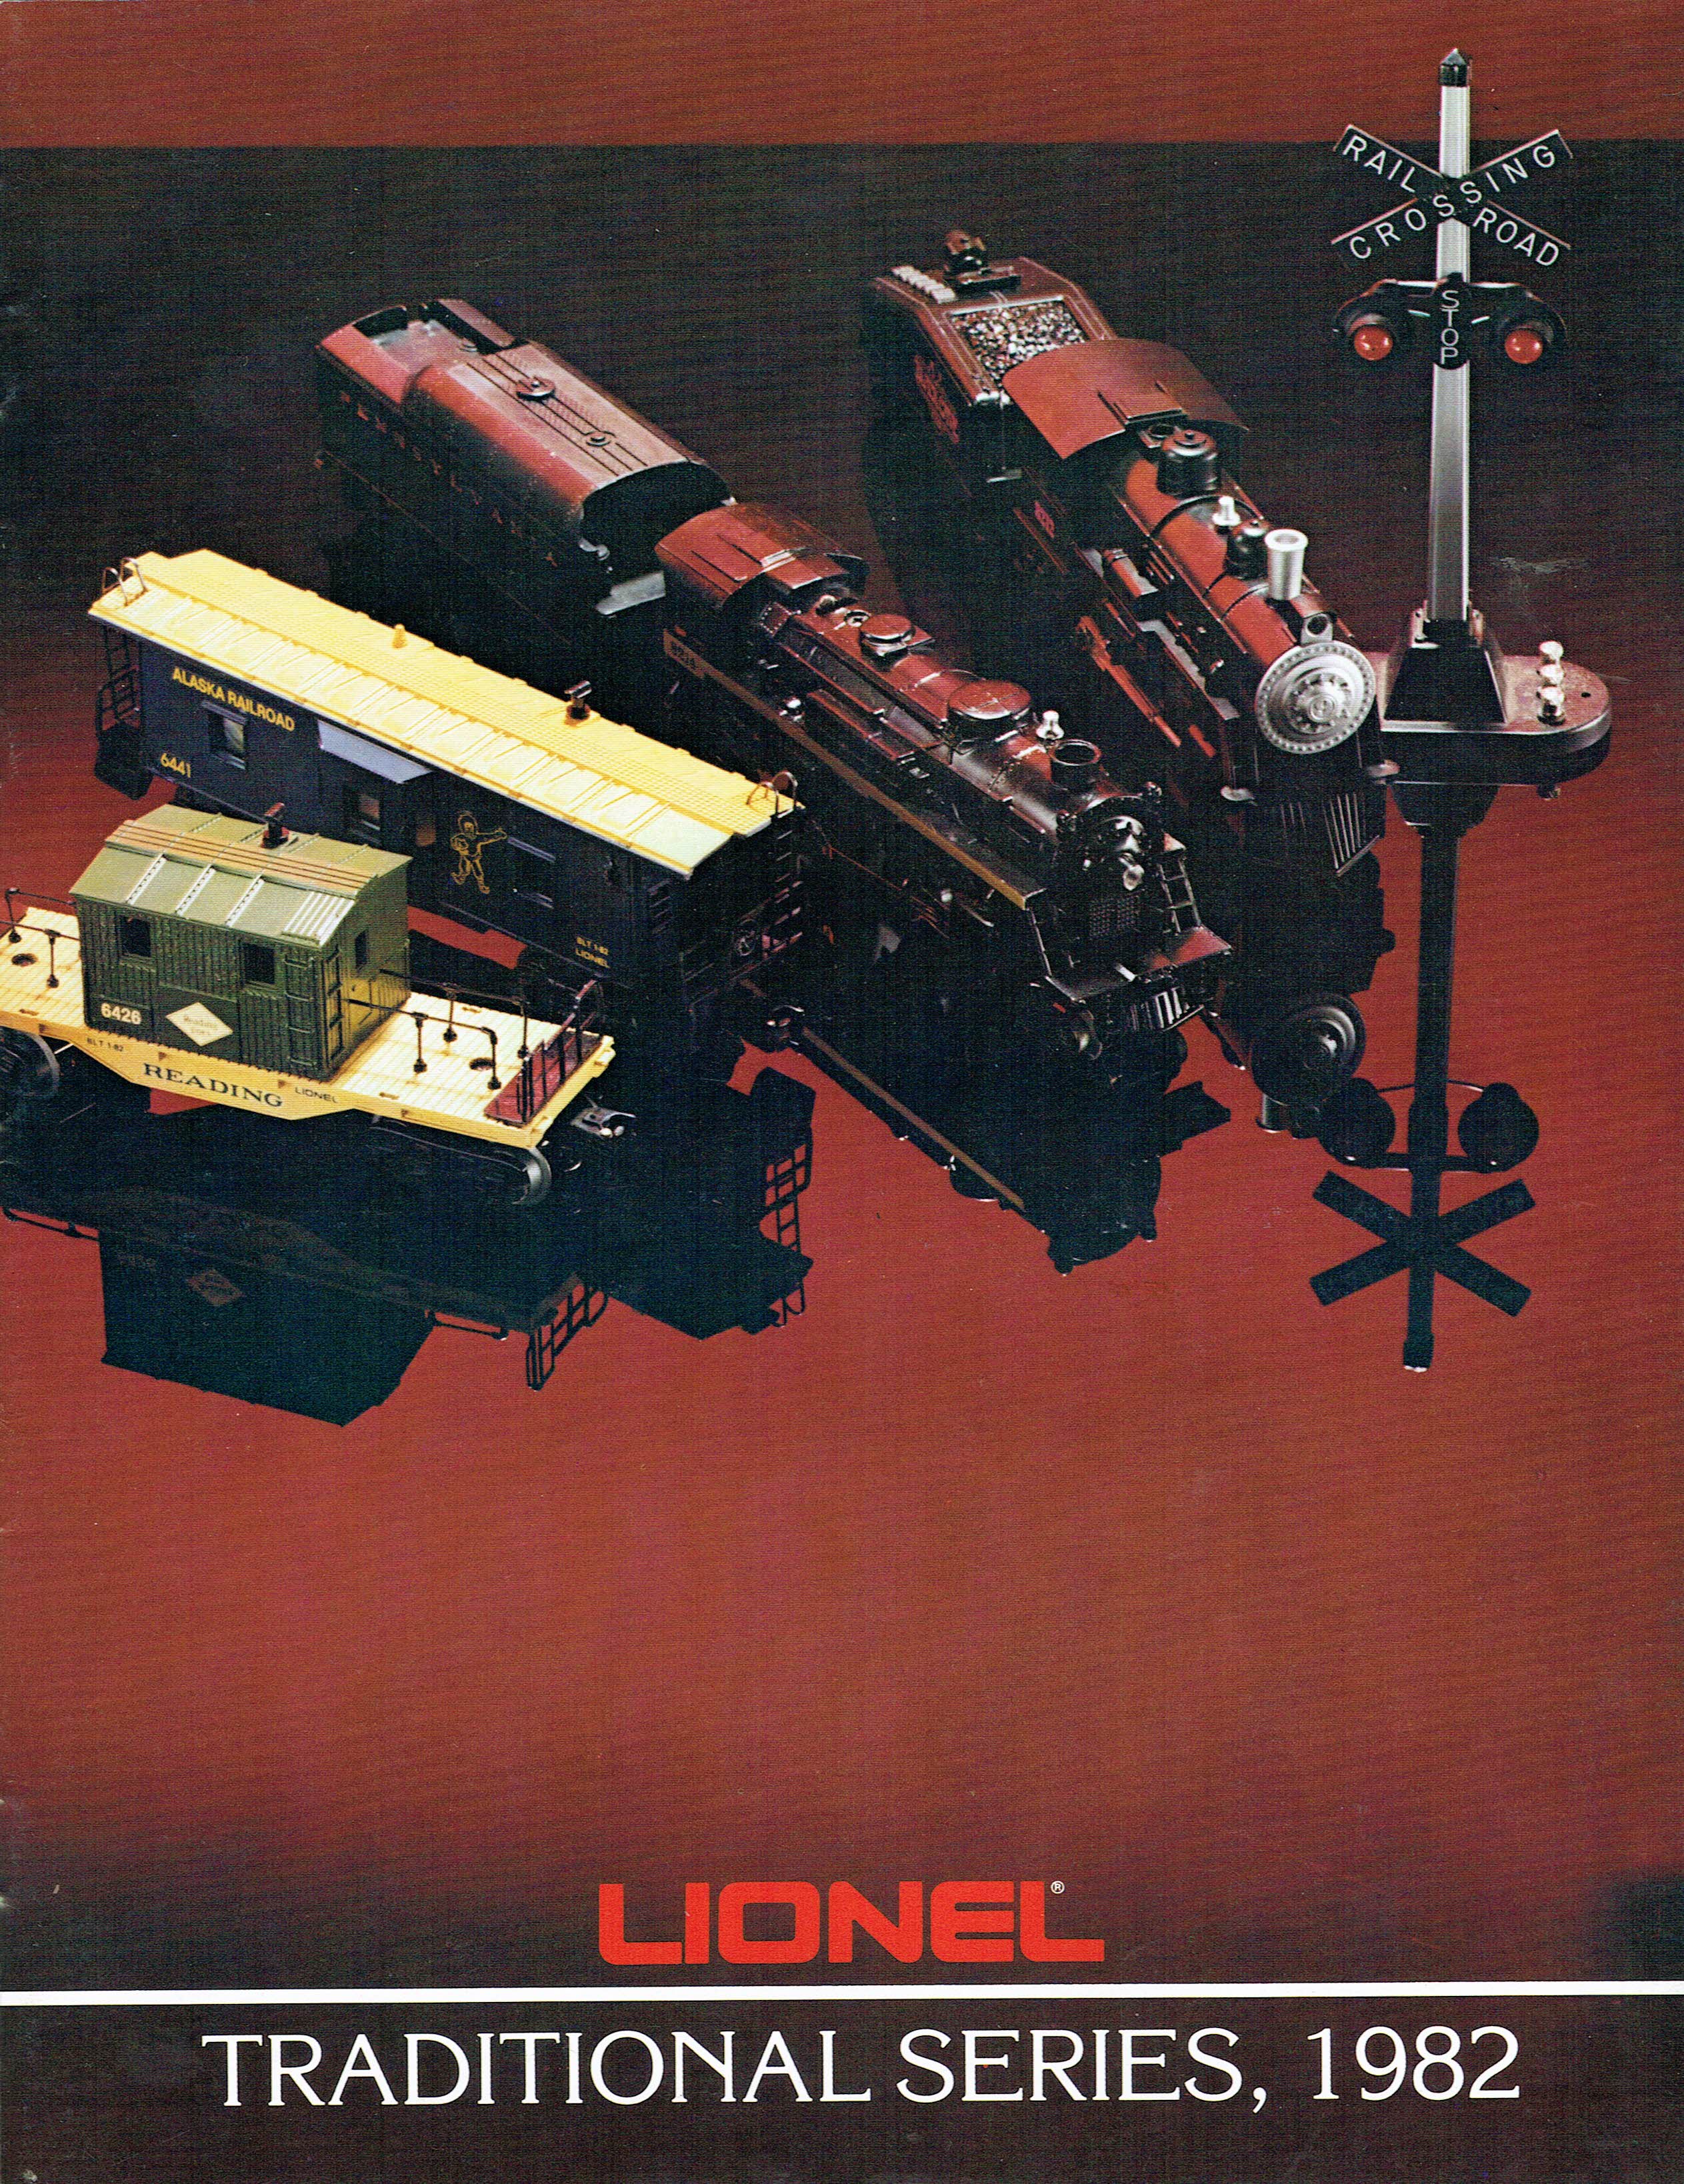 Lionel 1982 Traditional Series Catalog image